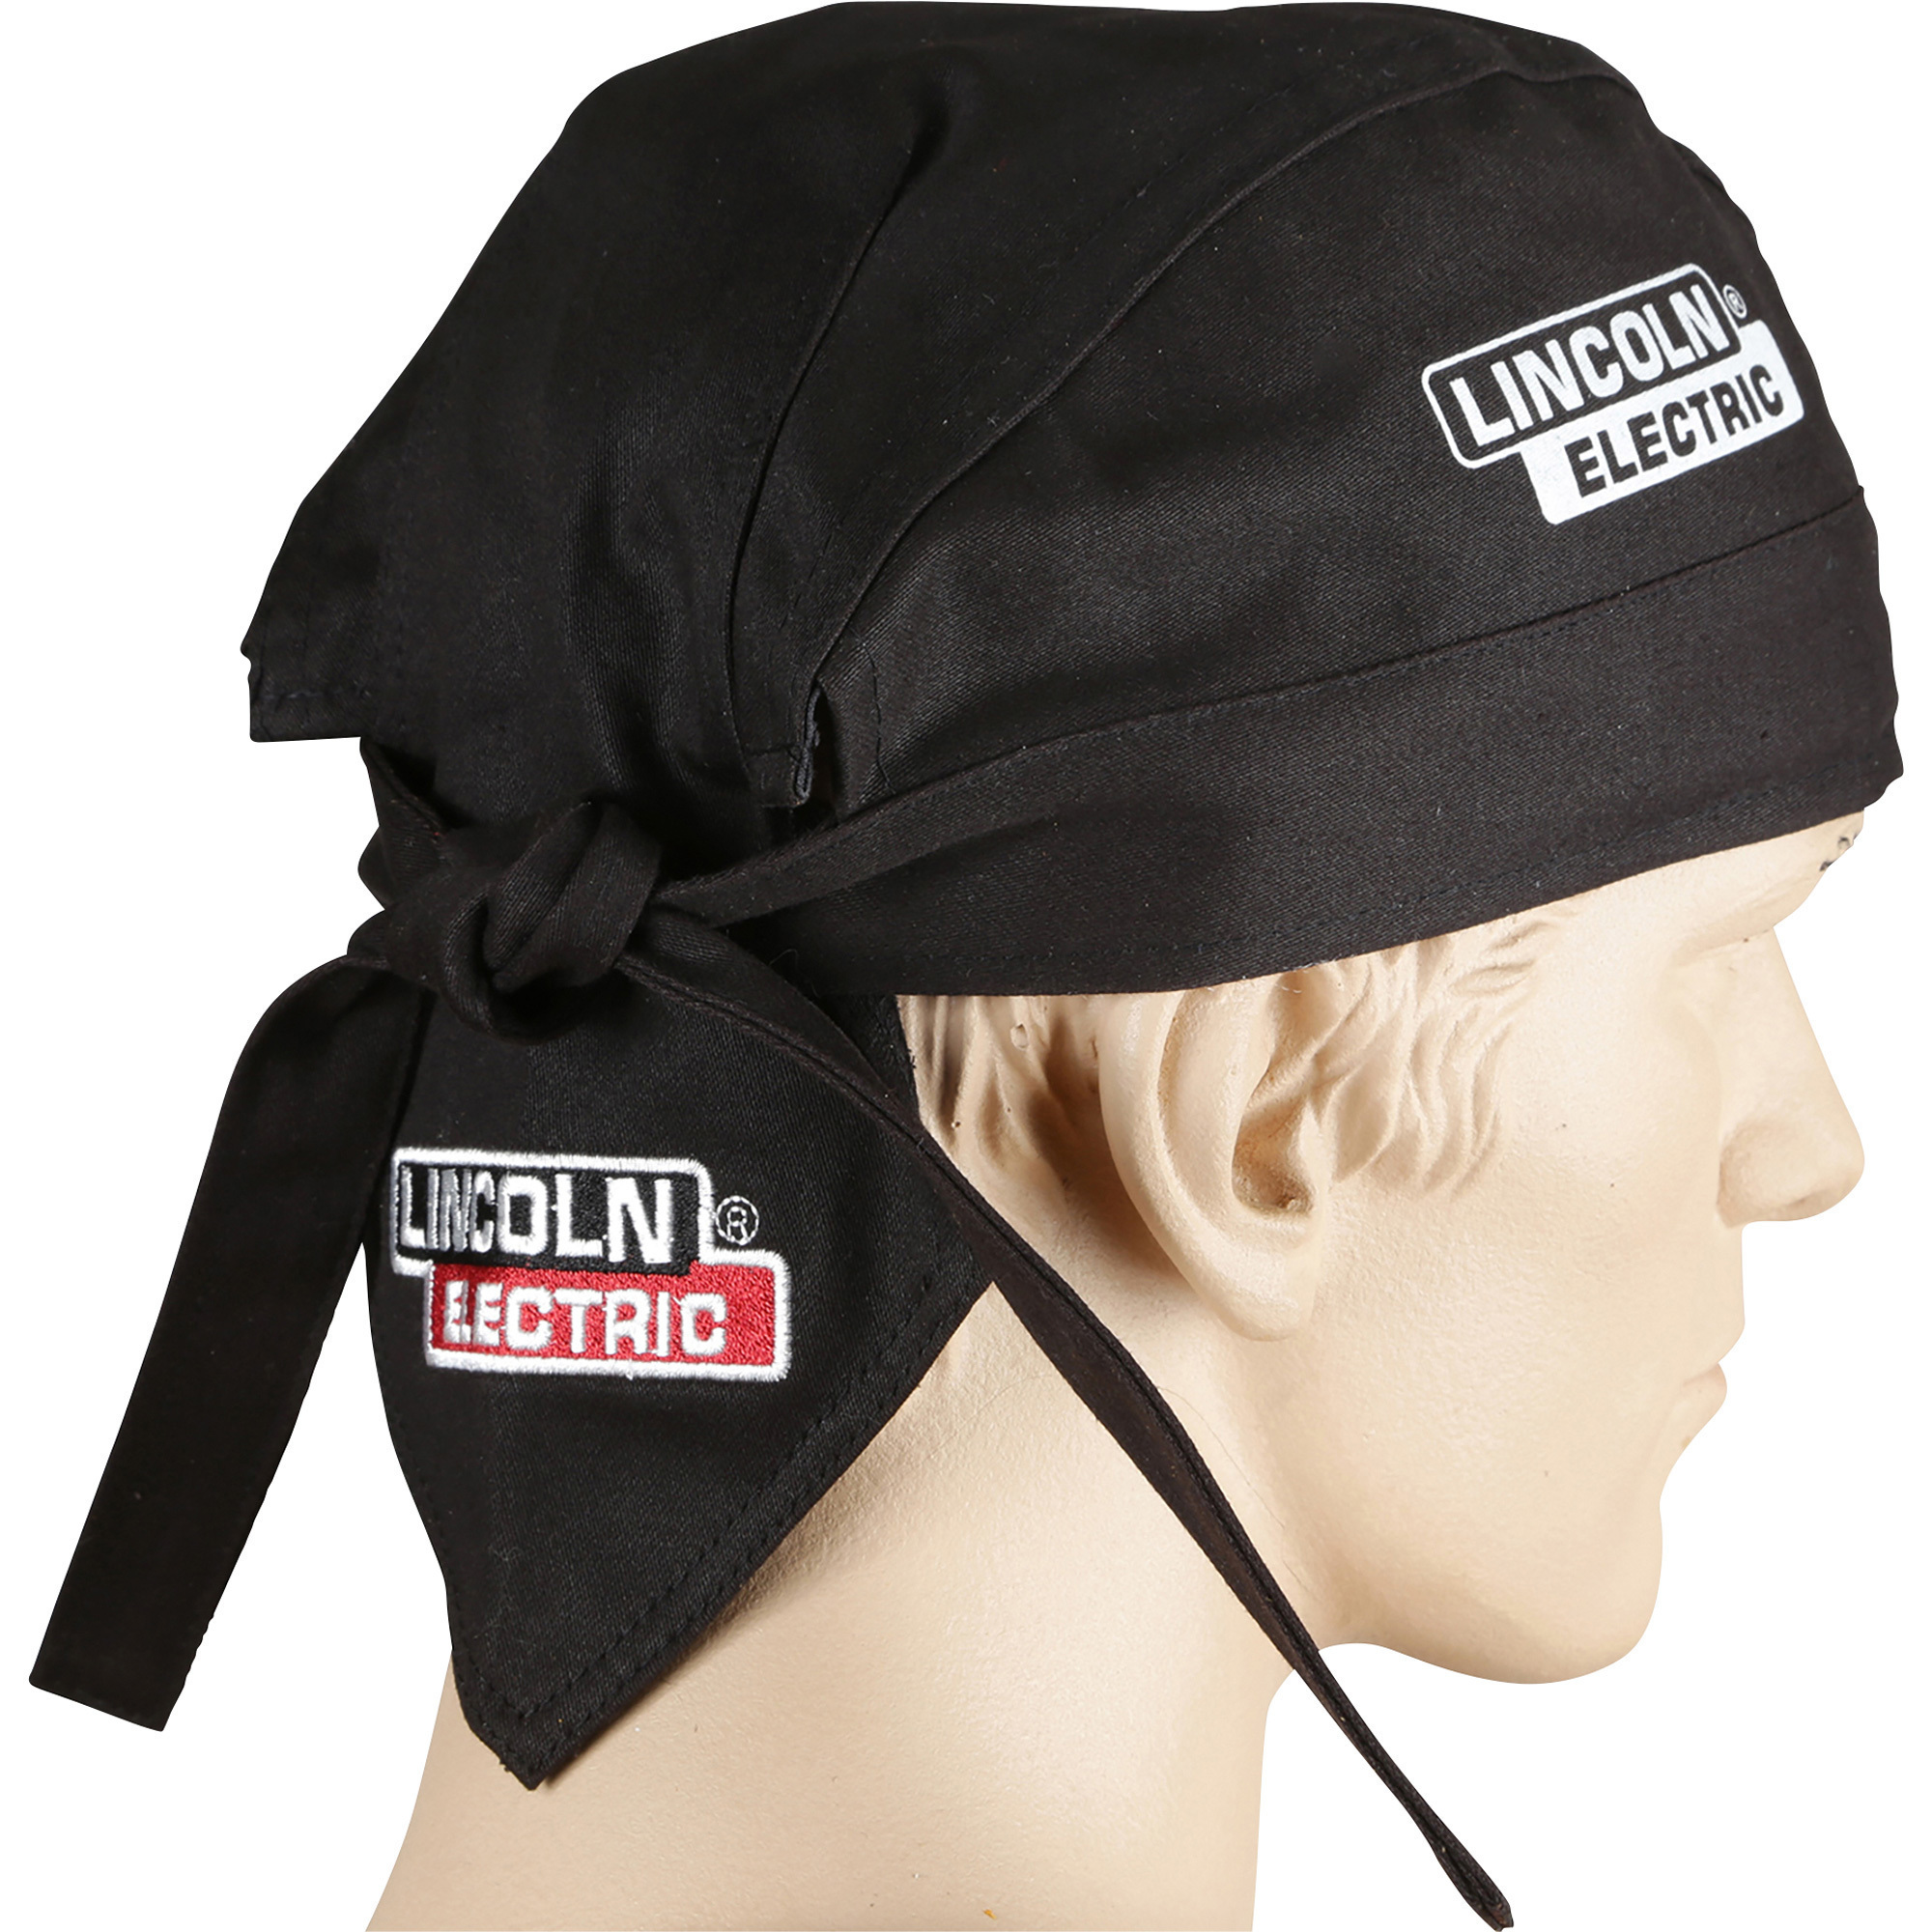 Premium Doo Rag — Black, One Size Fits Most, Model - Lincoln Electric KH822